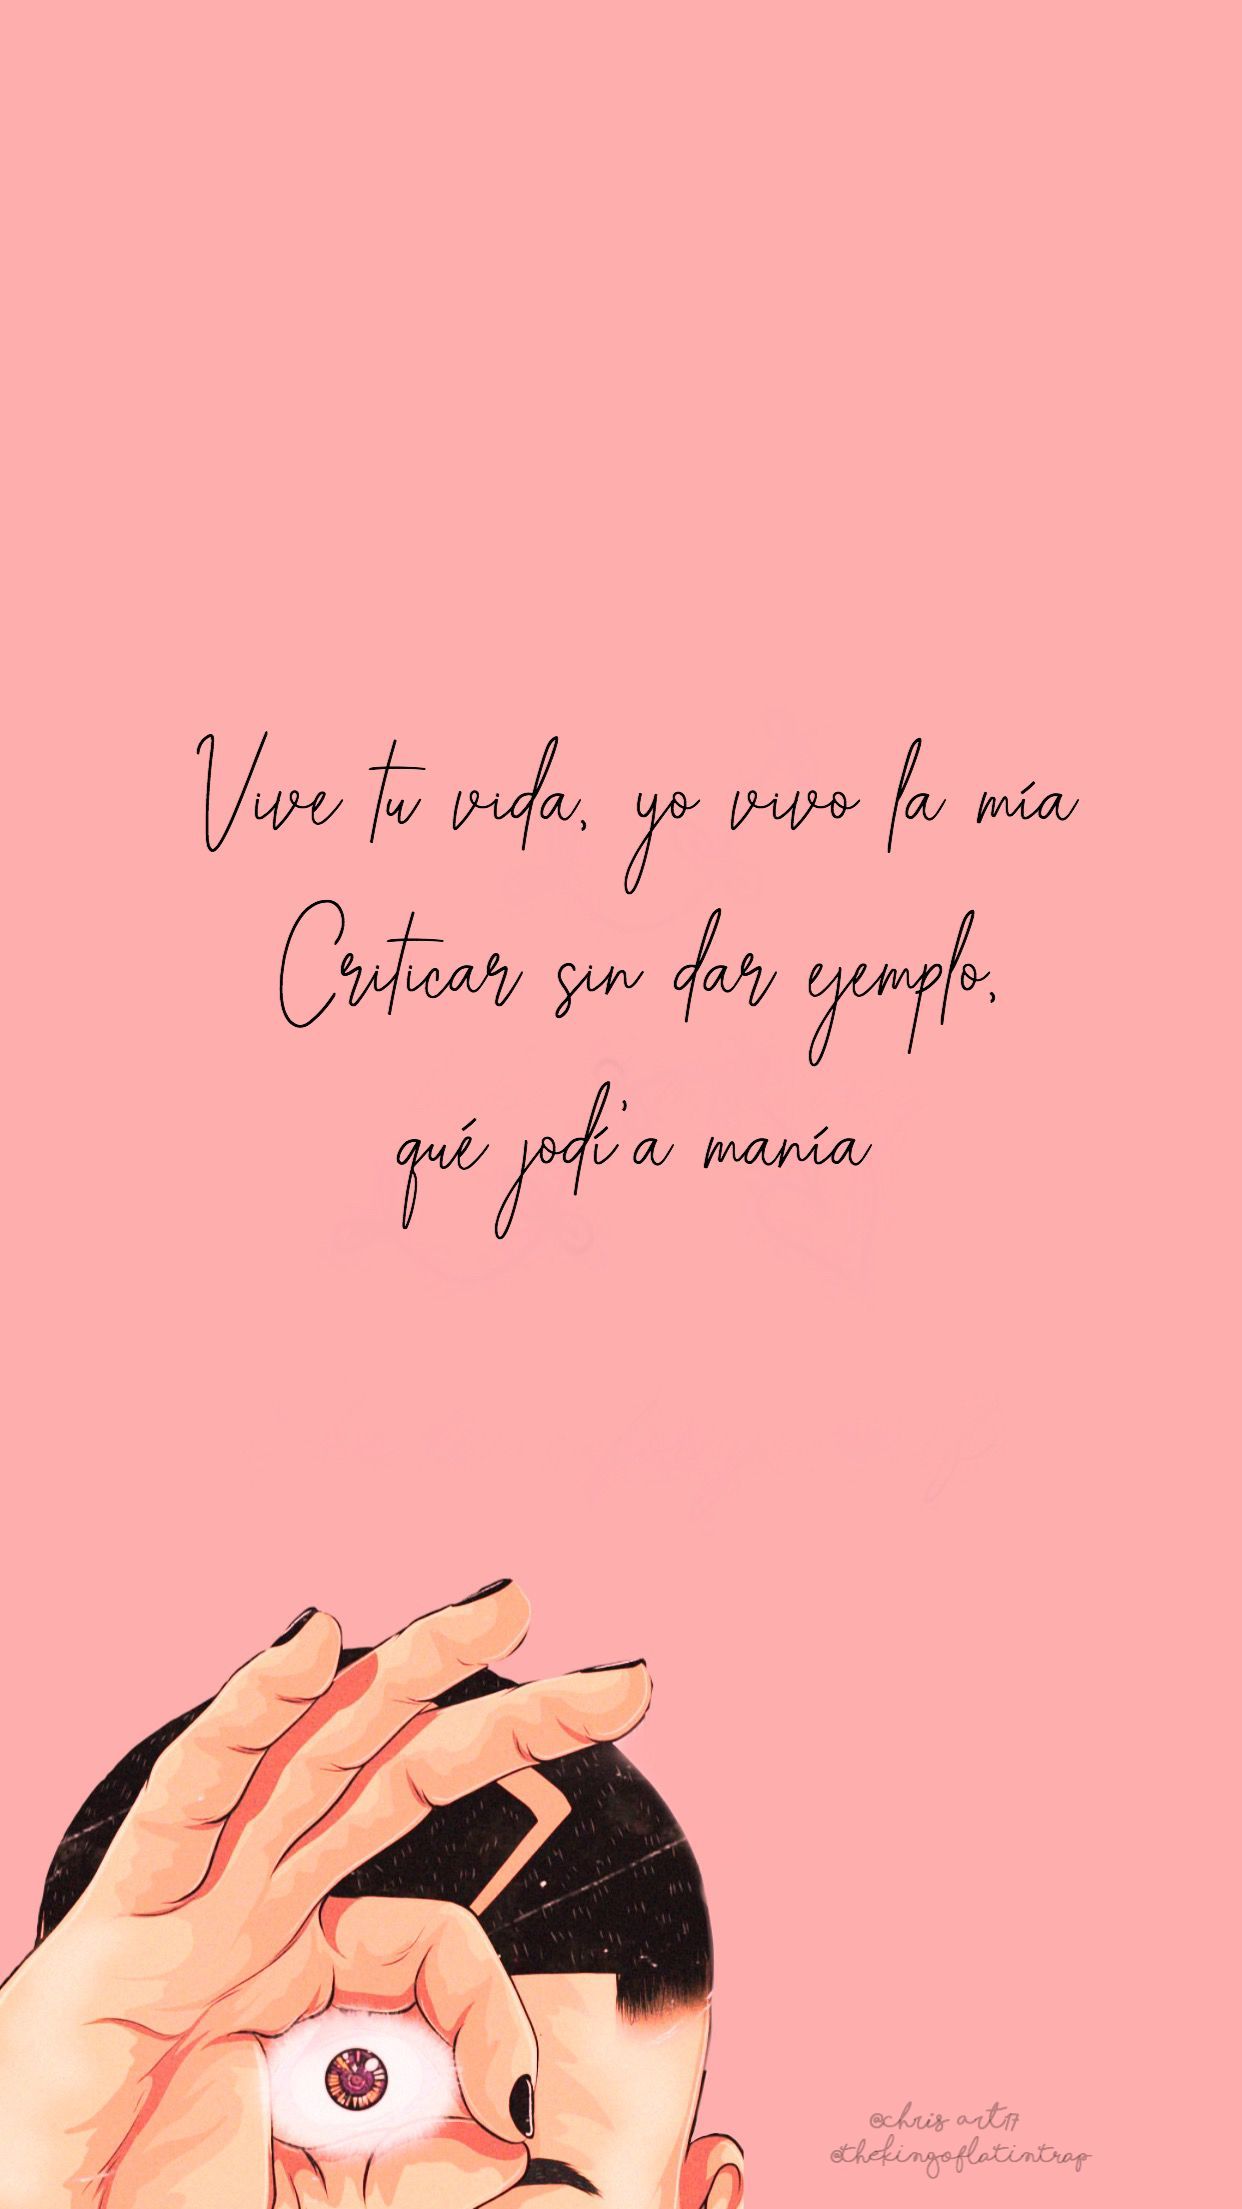 Tumblr Quotes Spanish Wallpapers